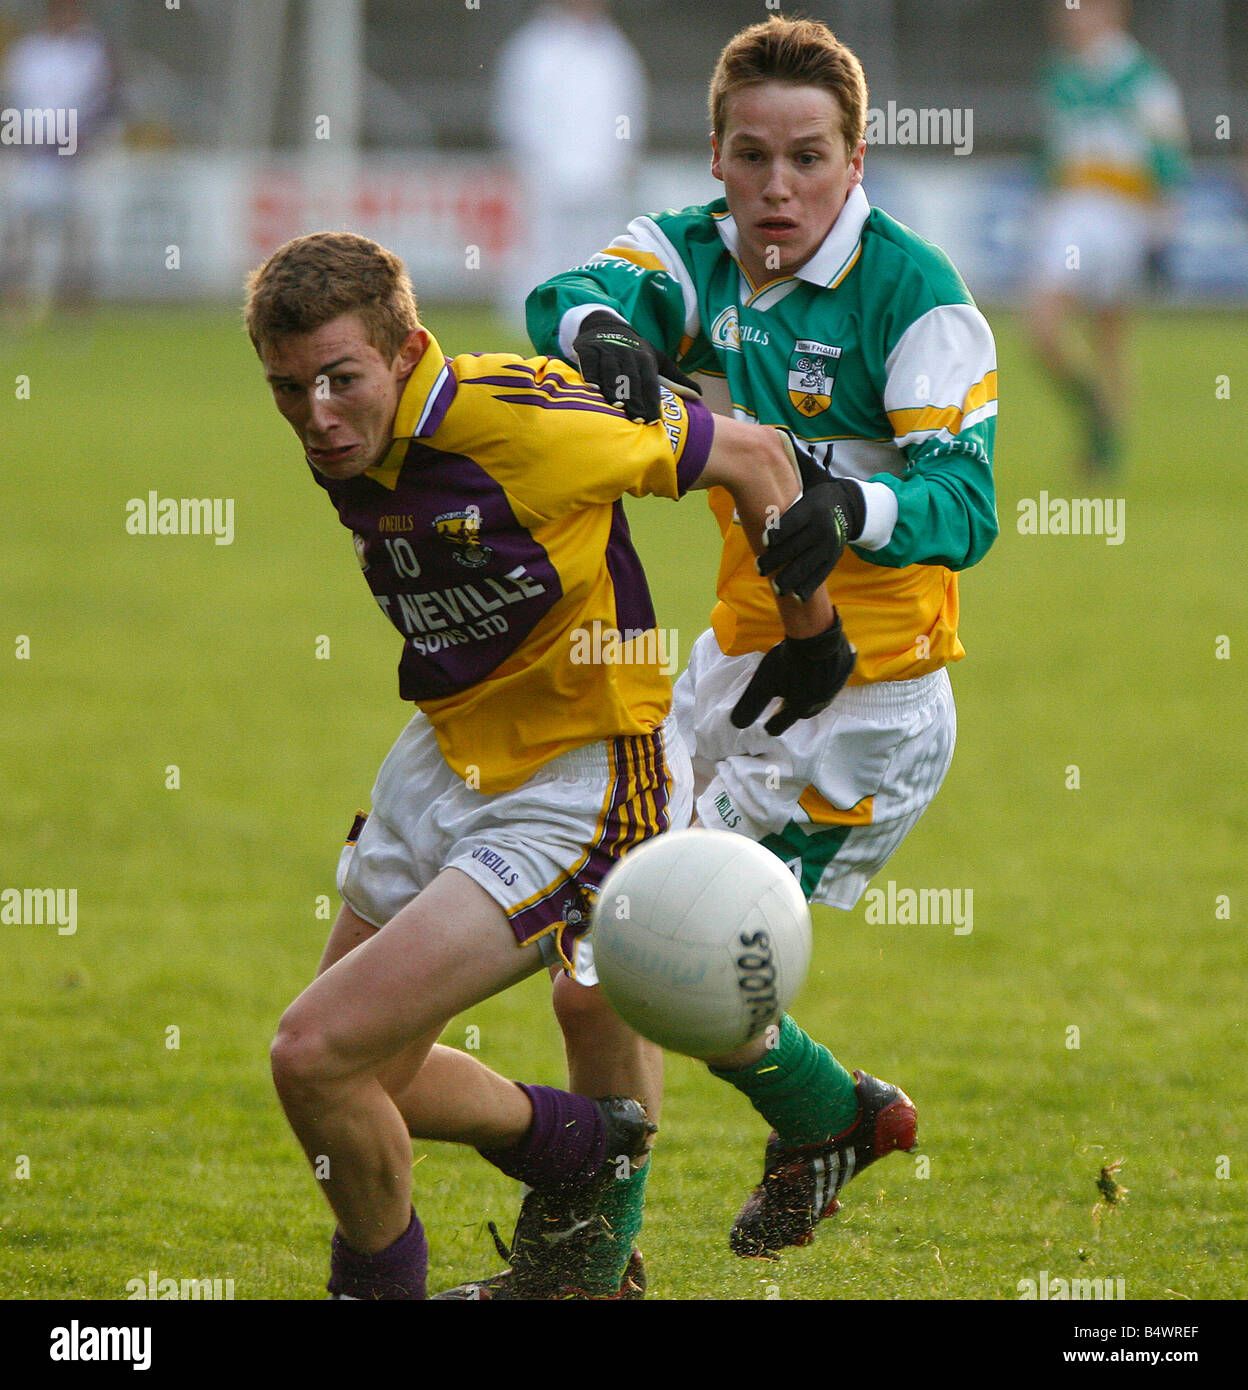 Gaelic football, commonly referred to as 'football', is a form of football played mainly Stock Photo